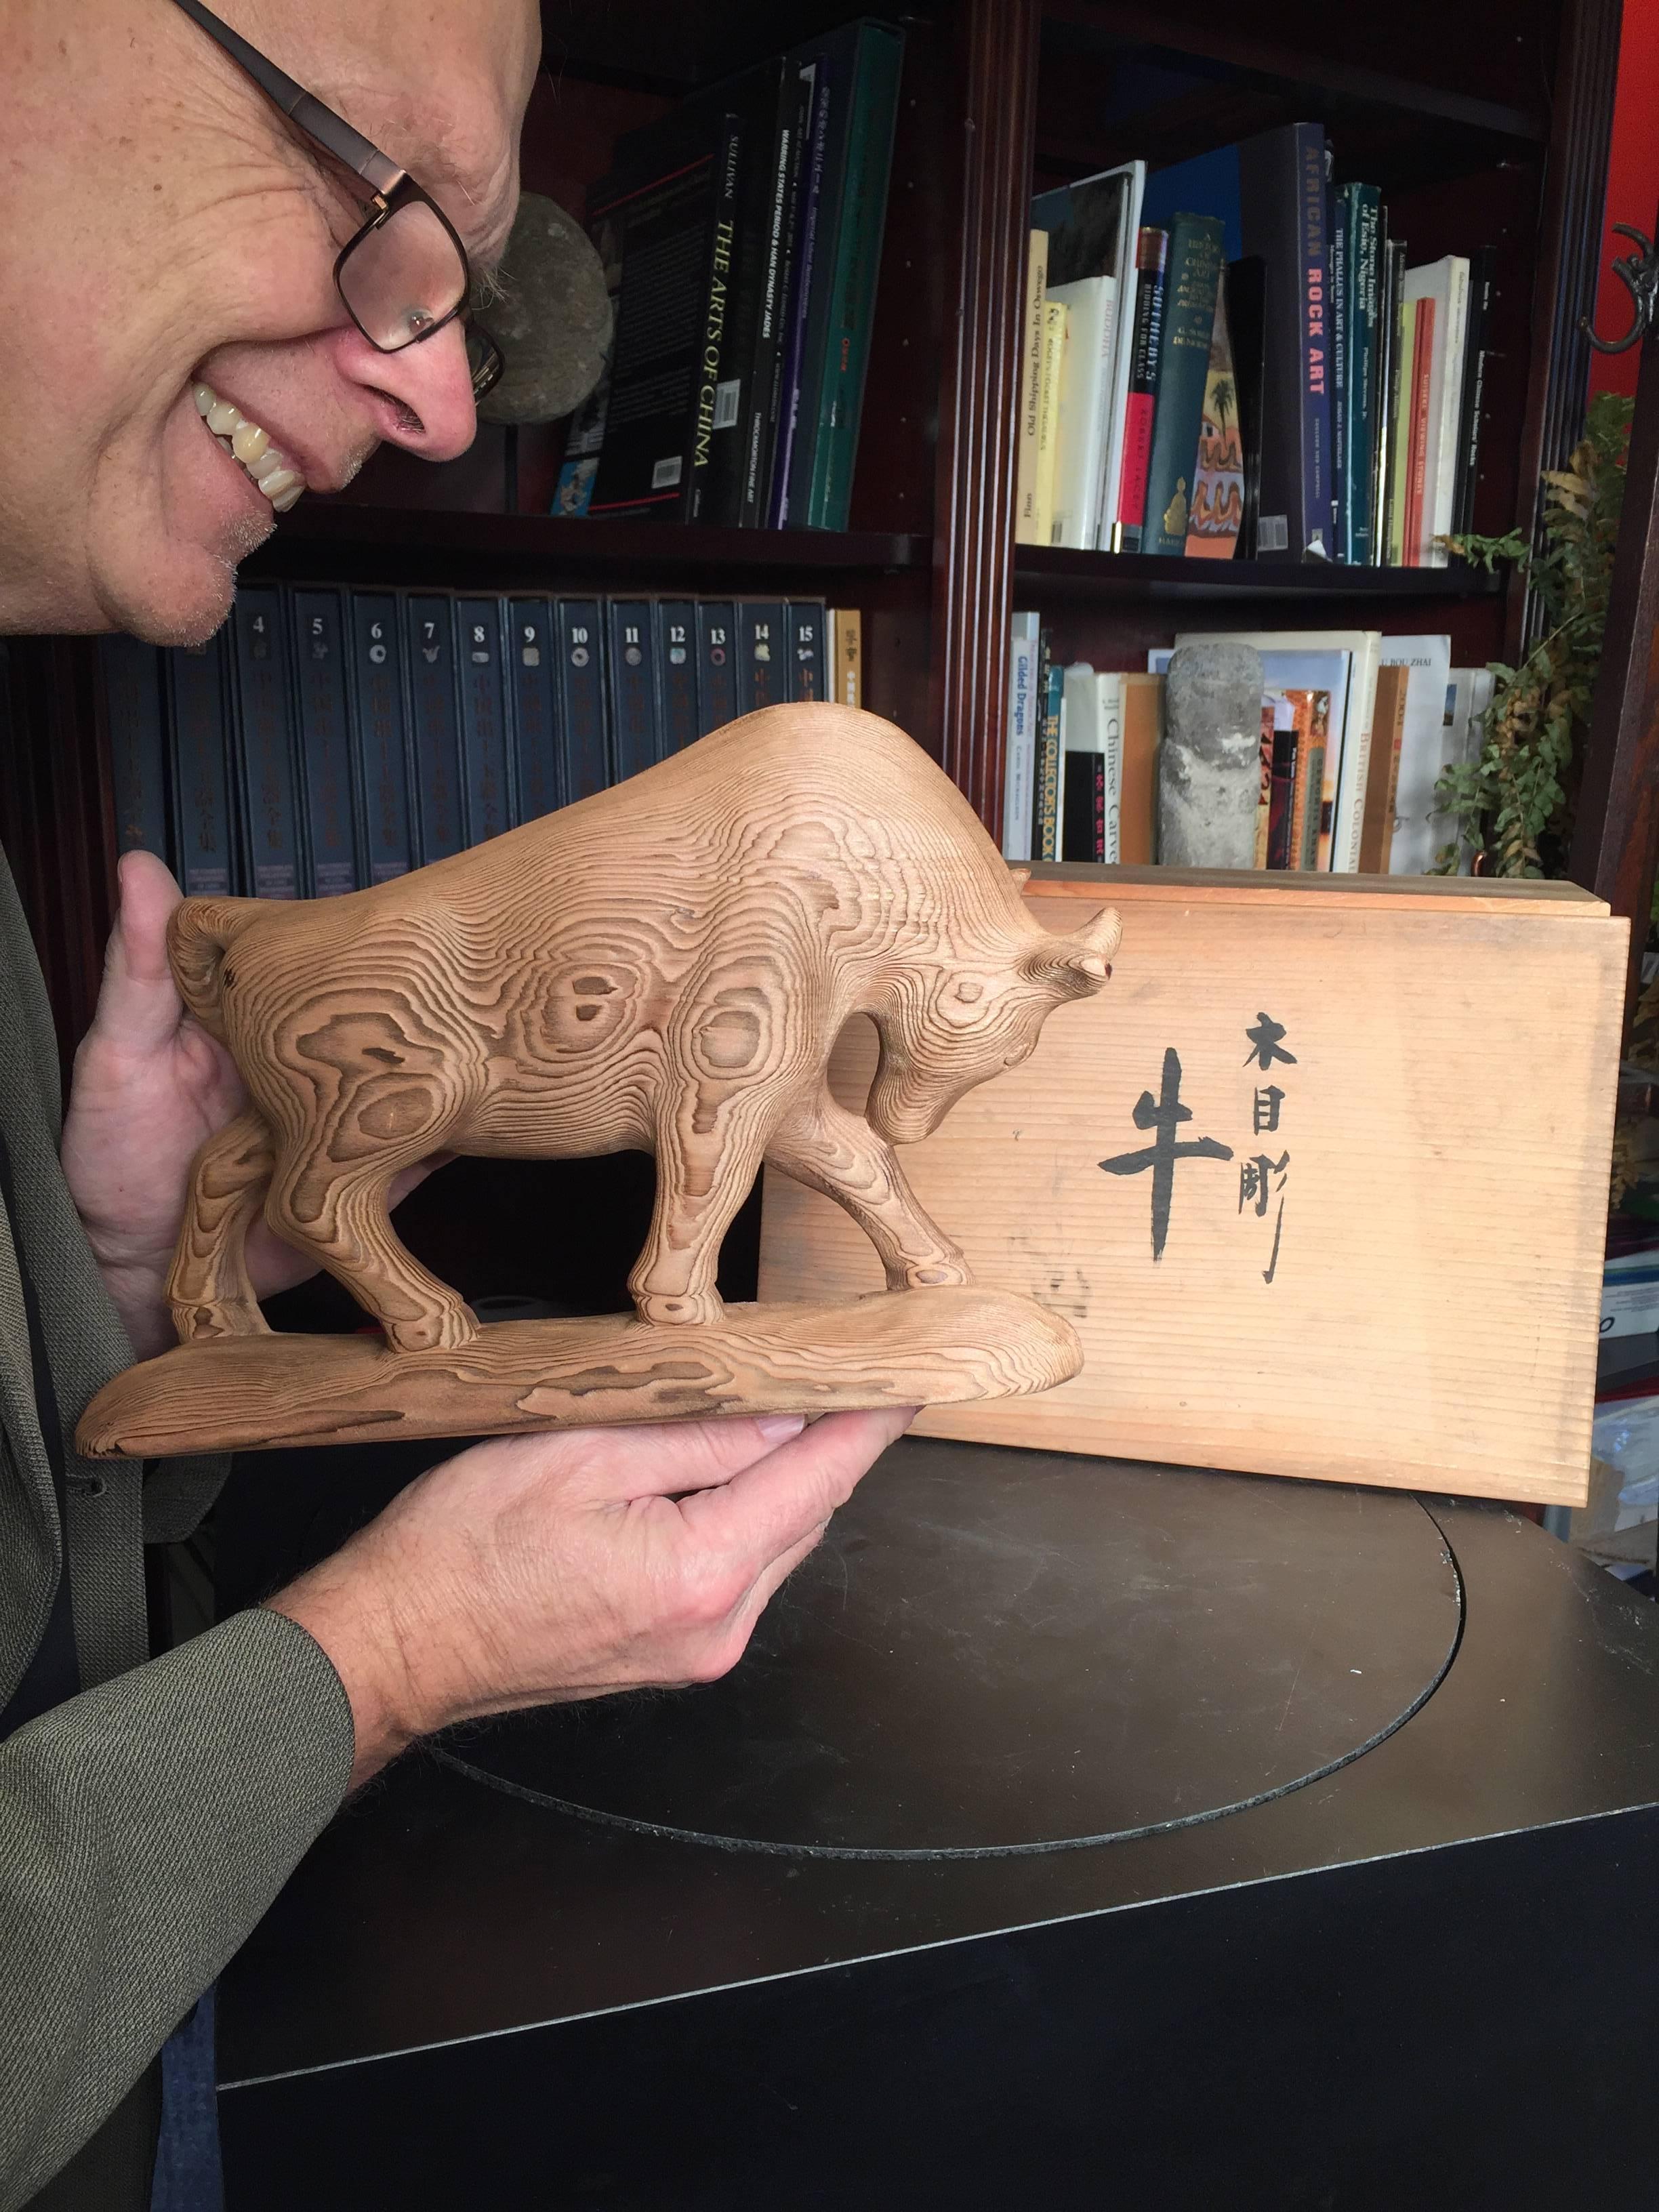 Signed, mint and boxed

Here's a beautiful and unique way to accent your indoor space with this very special handmade treasure from Japan! 

This is a finely hand-carved realistically finished wooden effigy of a magnificent charging bull or